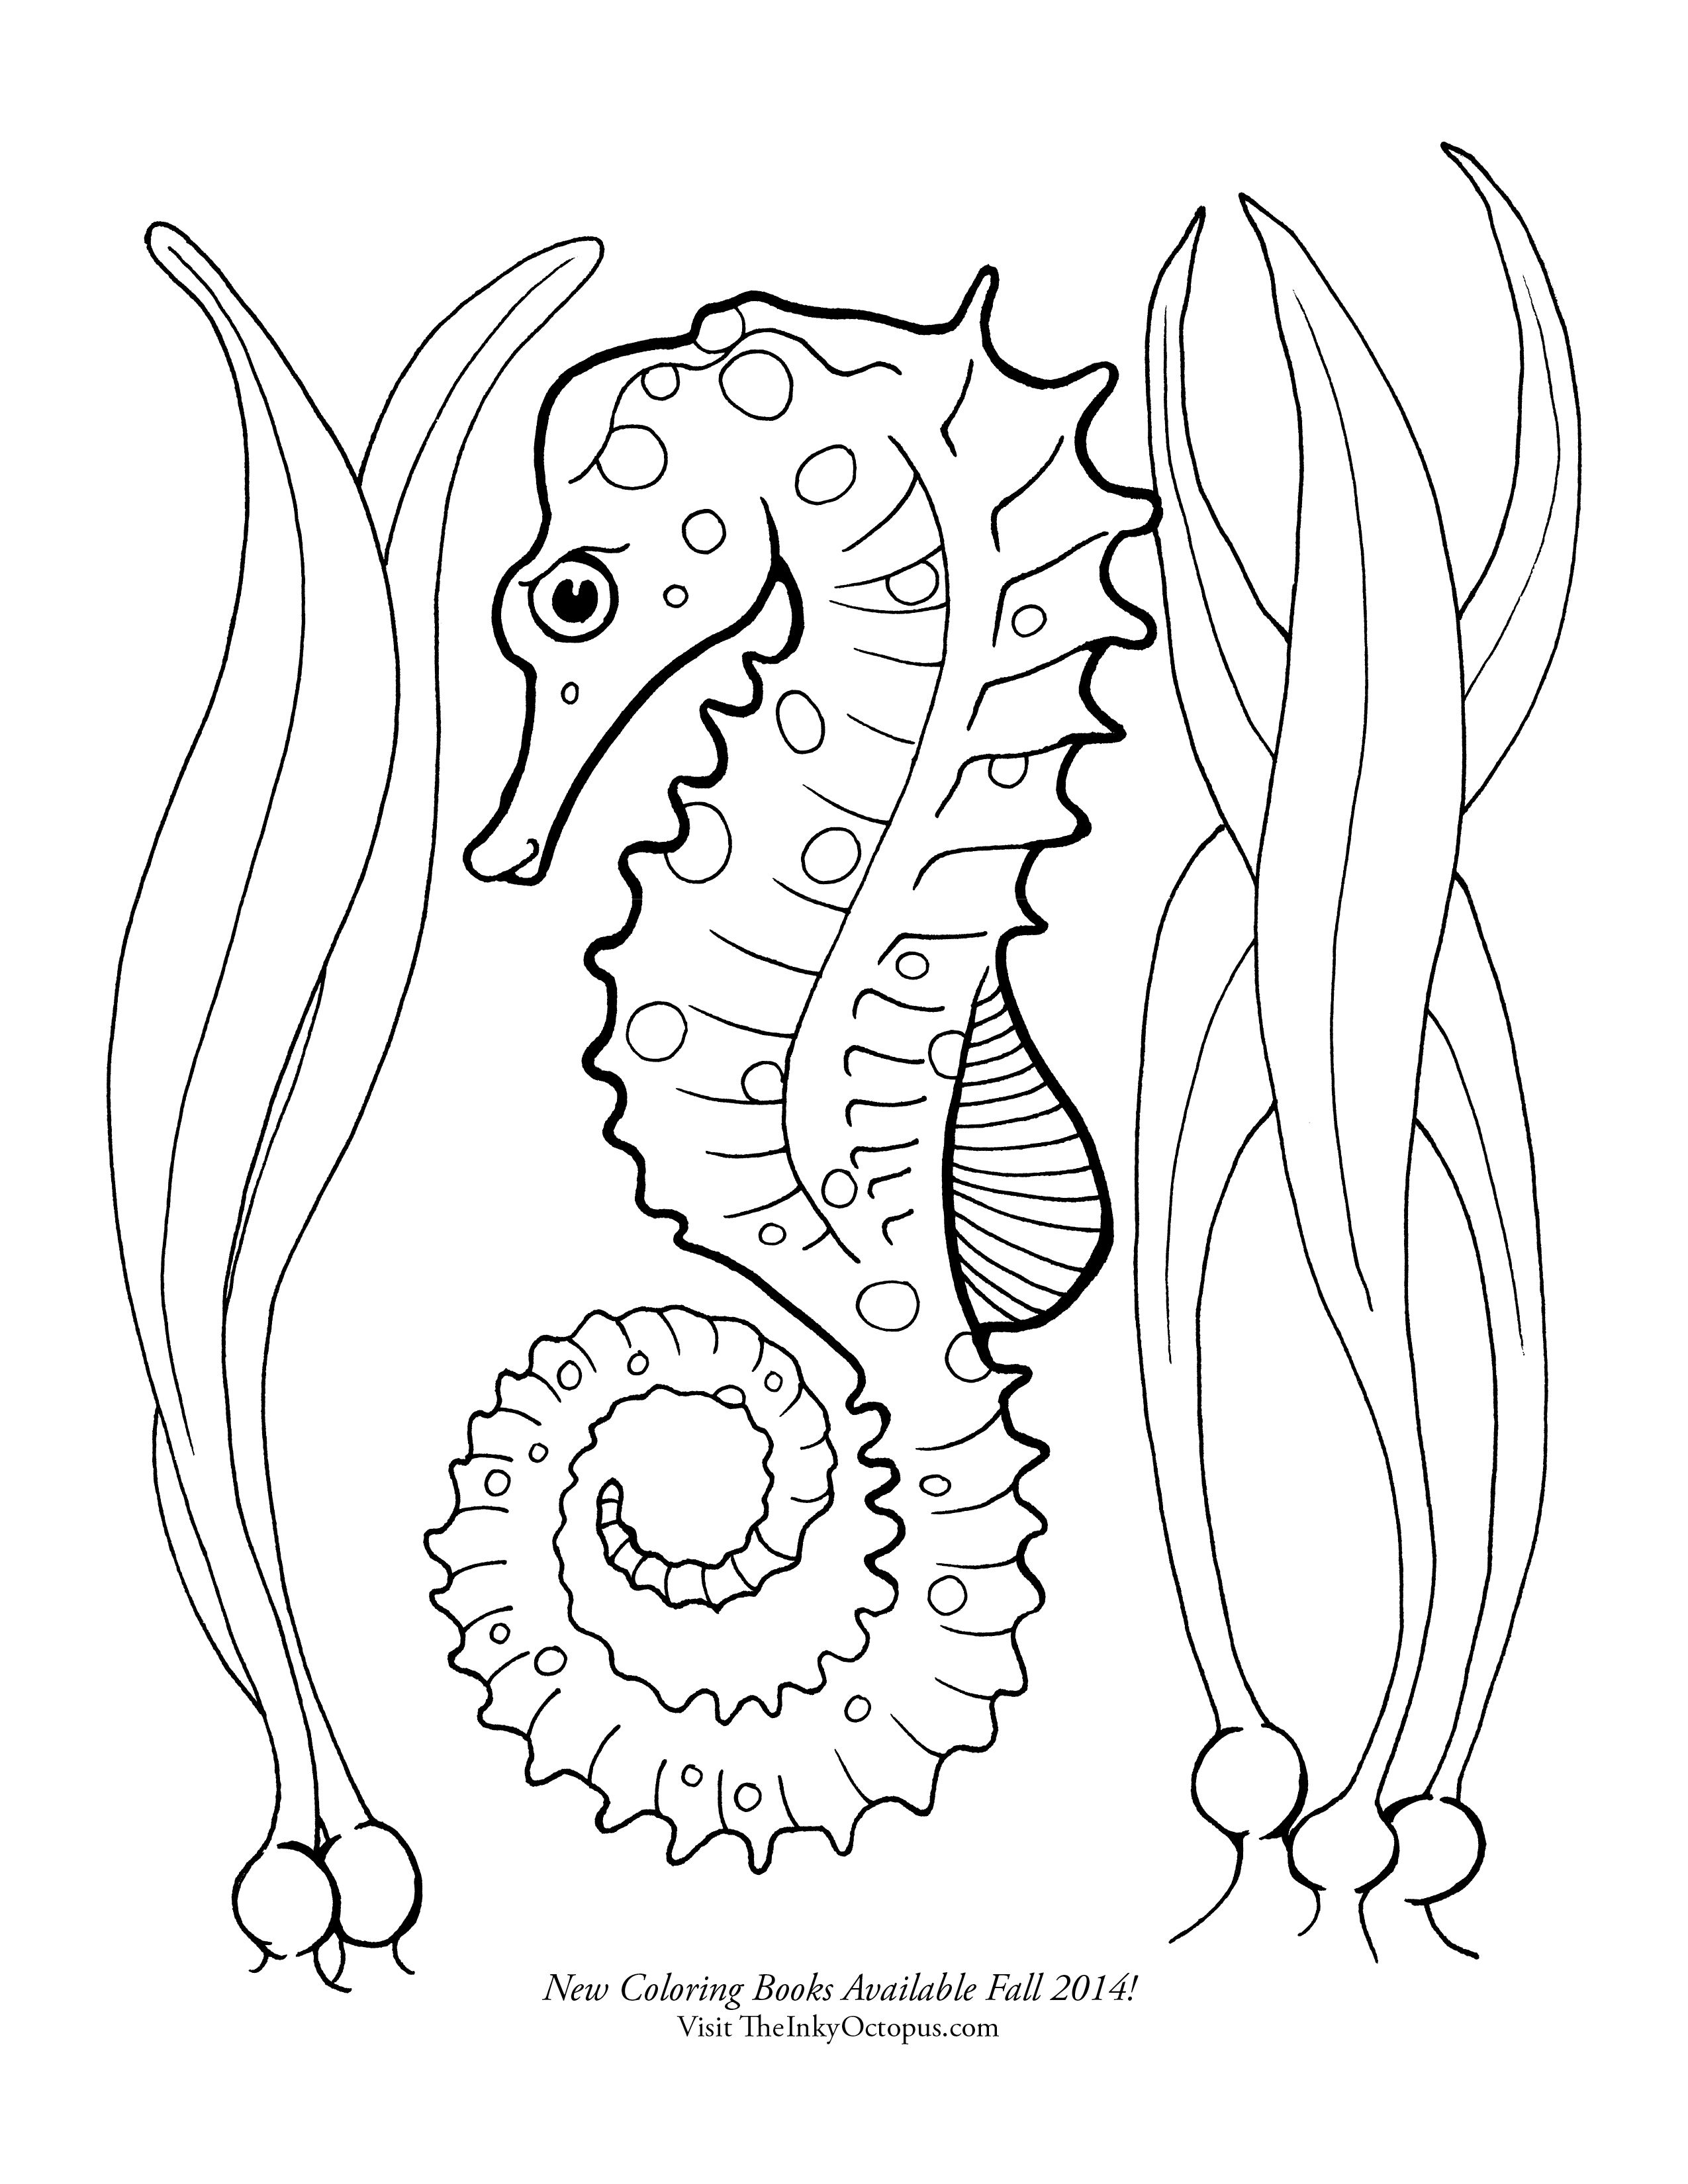 seahorse coloring page - Google Search | Butterfly coloring page ...